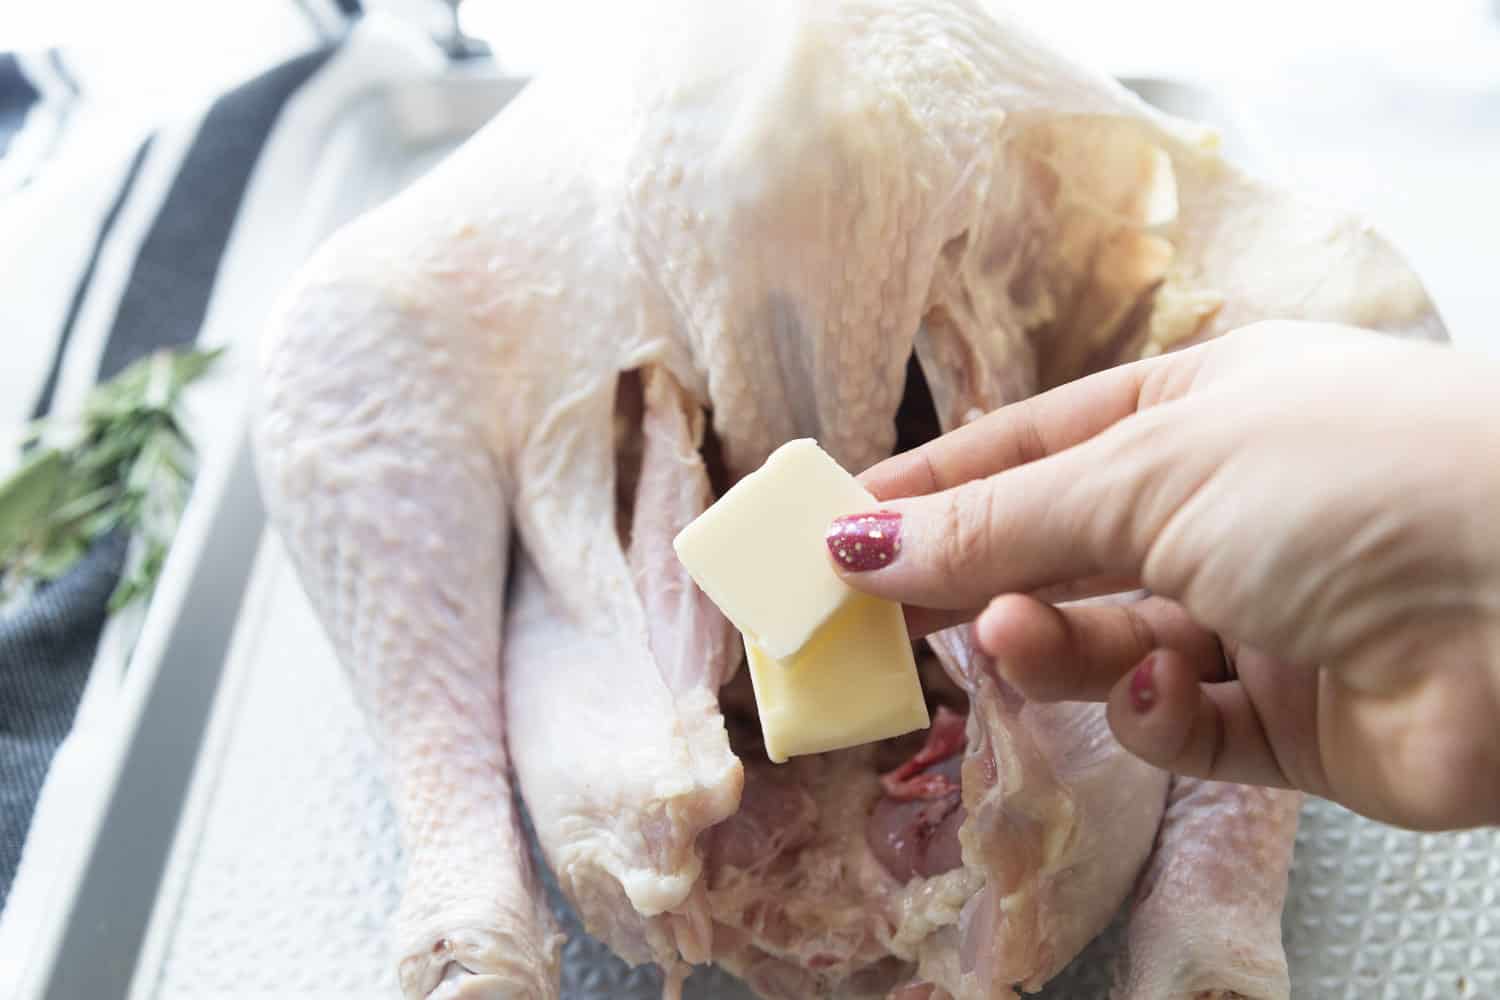 an uncooked thanksgiving turkey and a hand holding two pats of butter, preparing to put them under skin of turkey